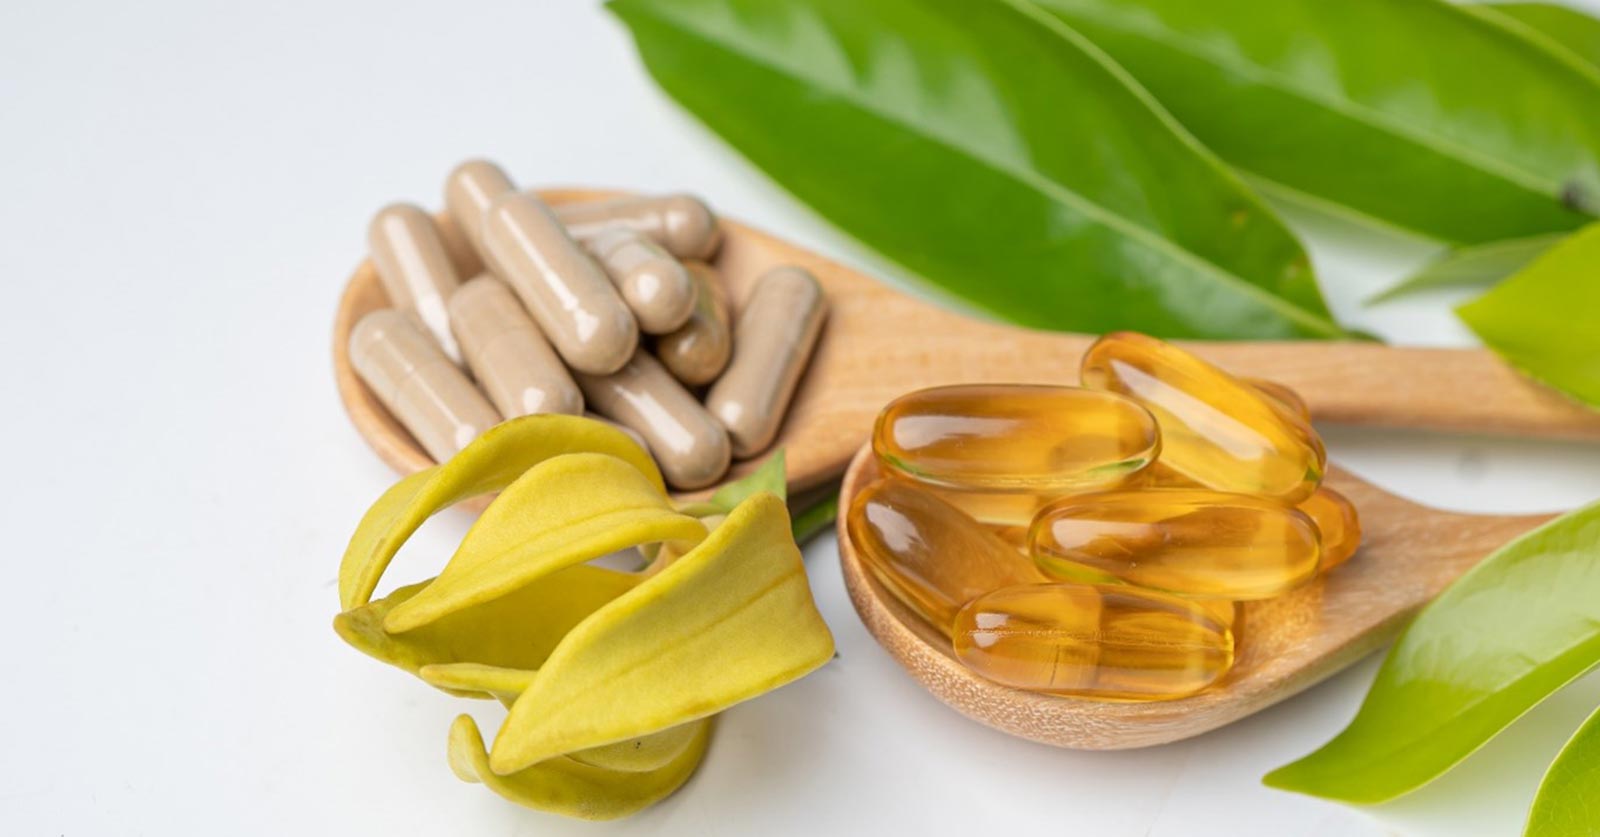 How Effective Are Supplements? - Elitecare Emergency Hospital